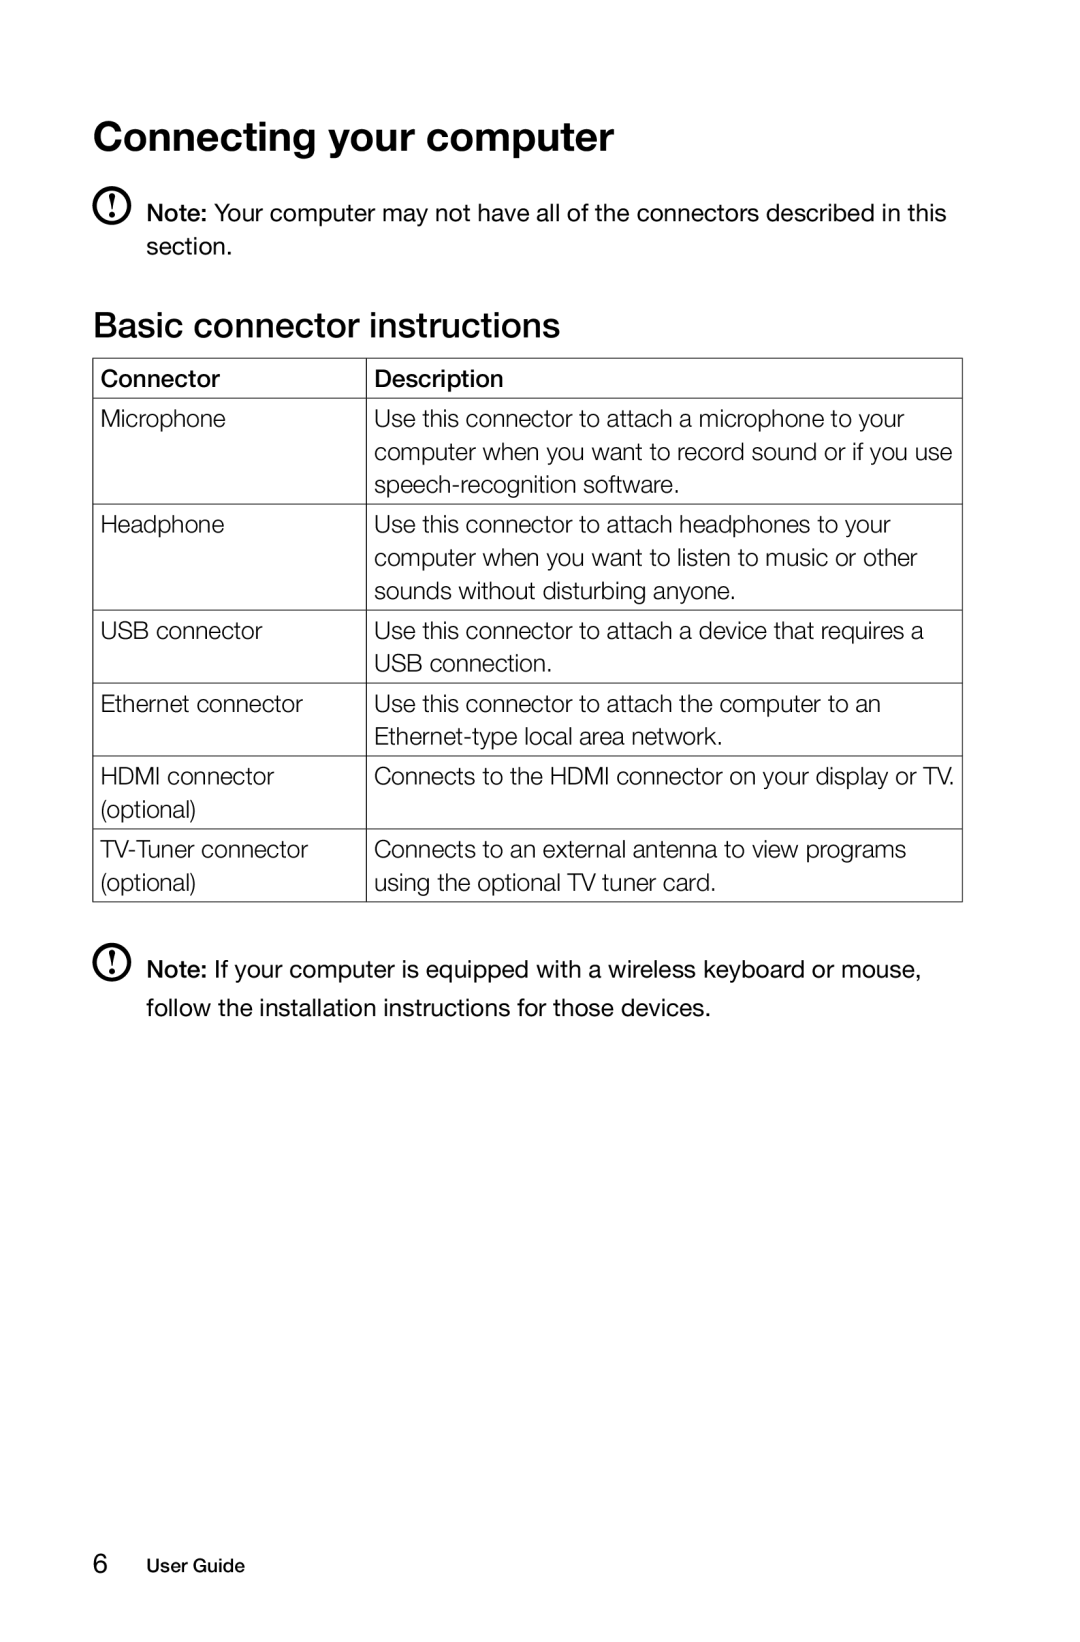 Lenovo A5 manual Connecting your computer, Basic connector instructions 